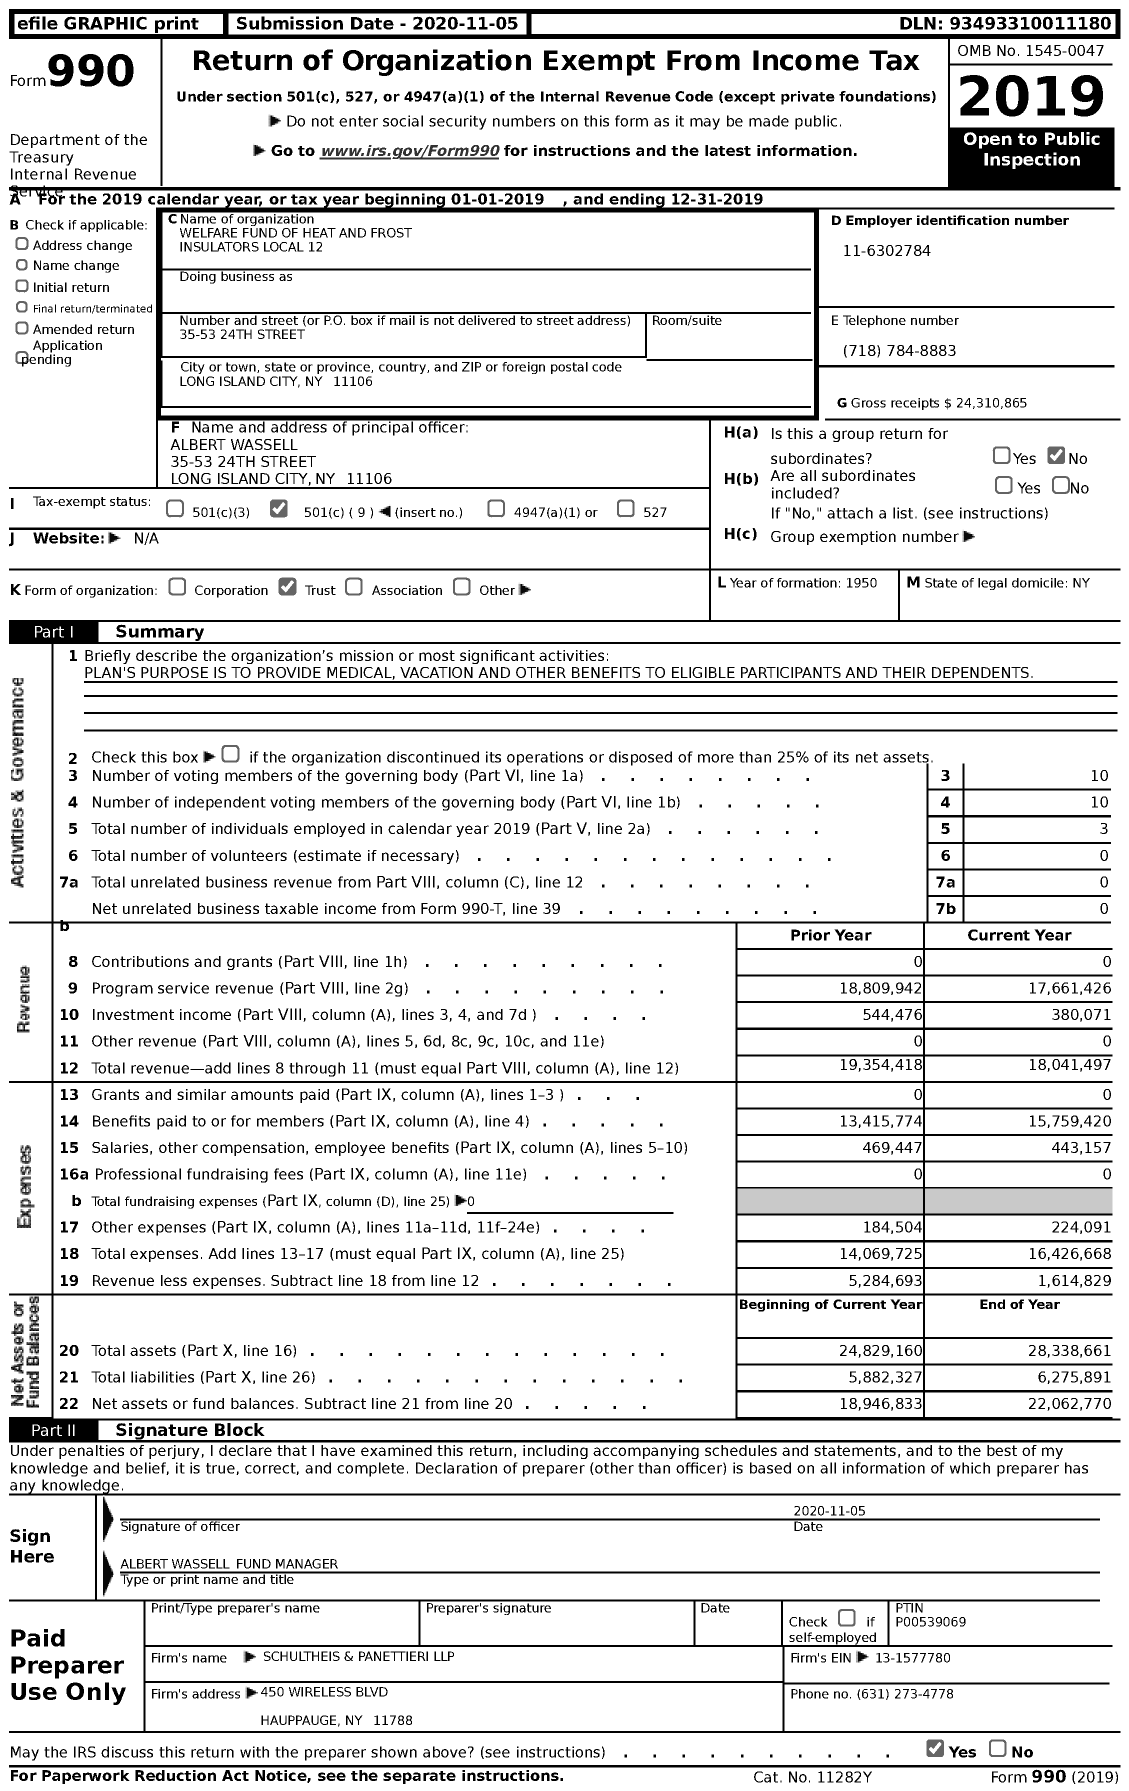 Image of first page of 2019 Form 990 for Welfare Fund of Heat and Frost Insulators Local 12